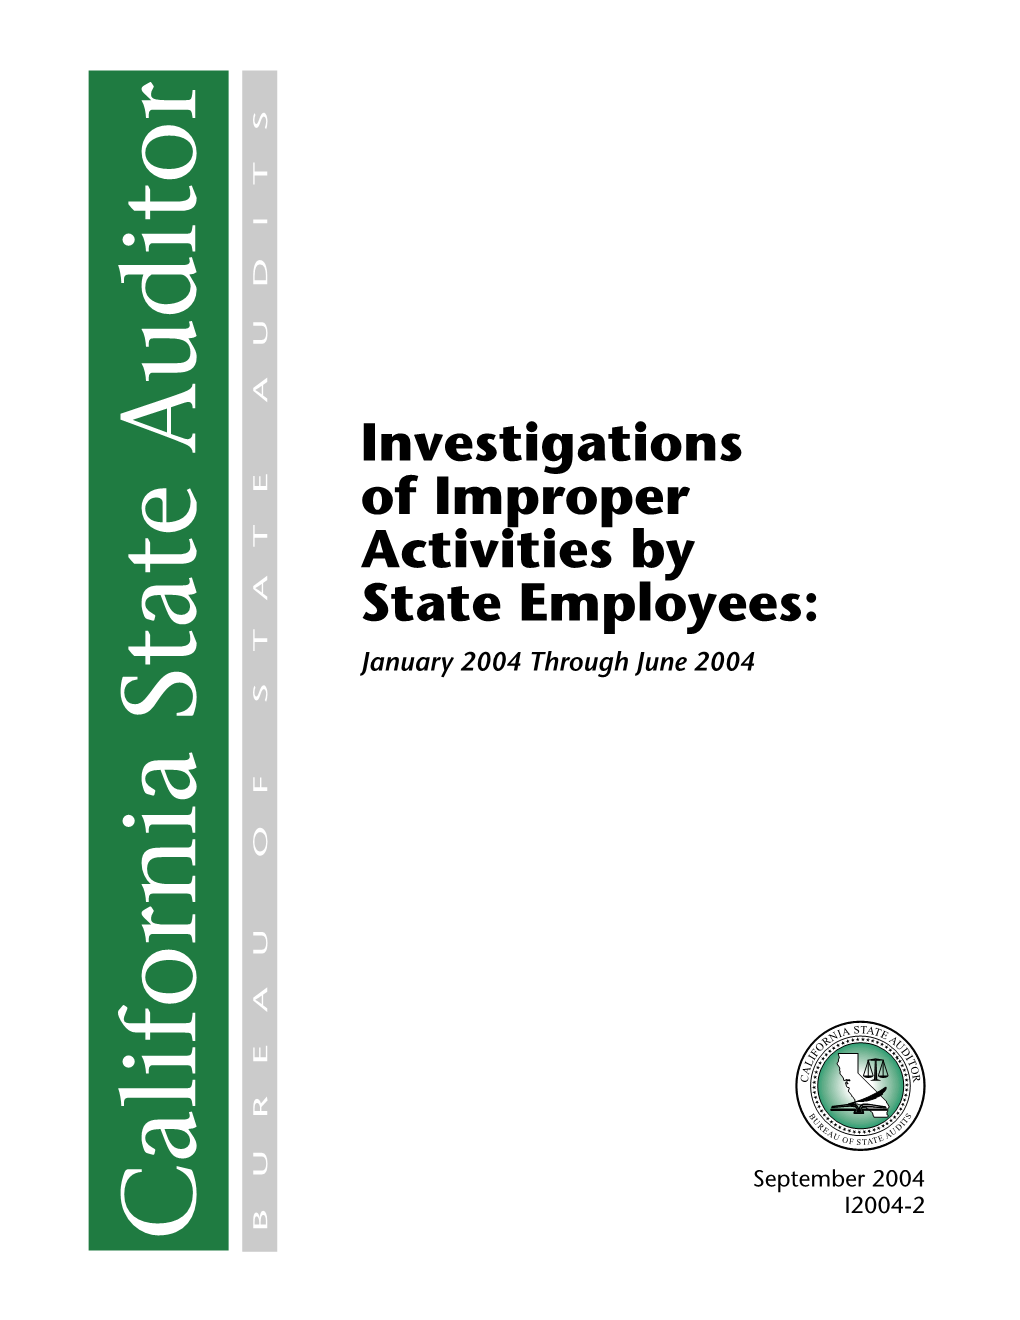 Investigations of Improper Activities by State Employees: January 2004 Through June 2004